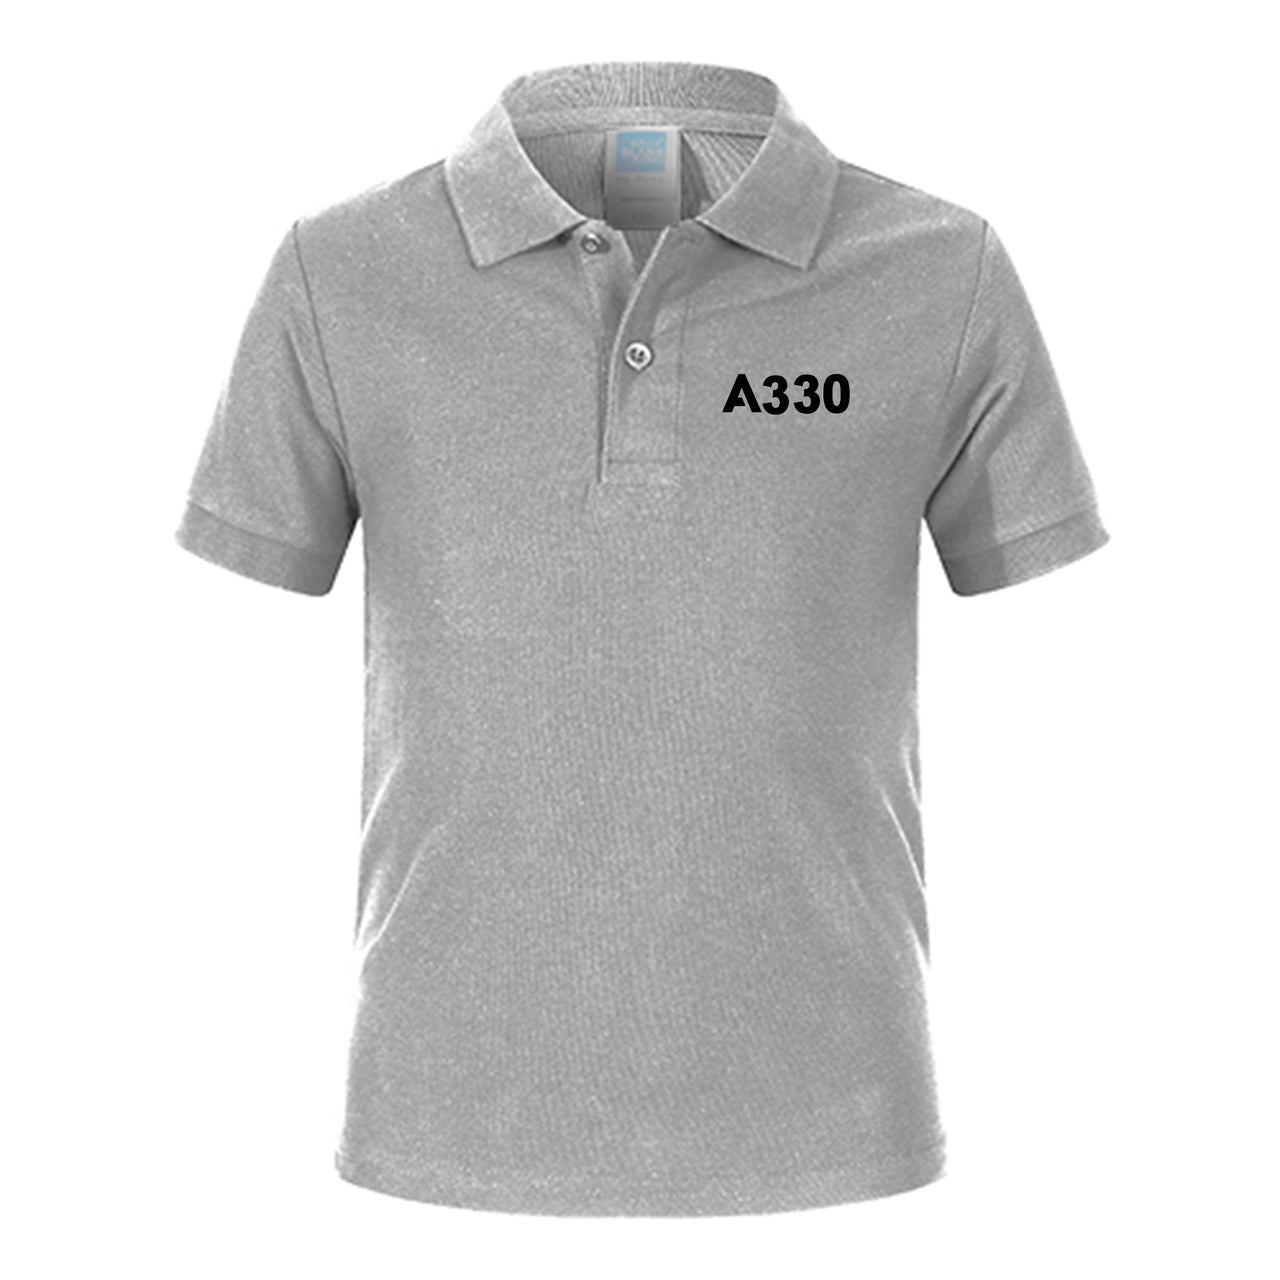 A330 Flat Text Designed Children Polo T-Shirts